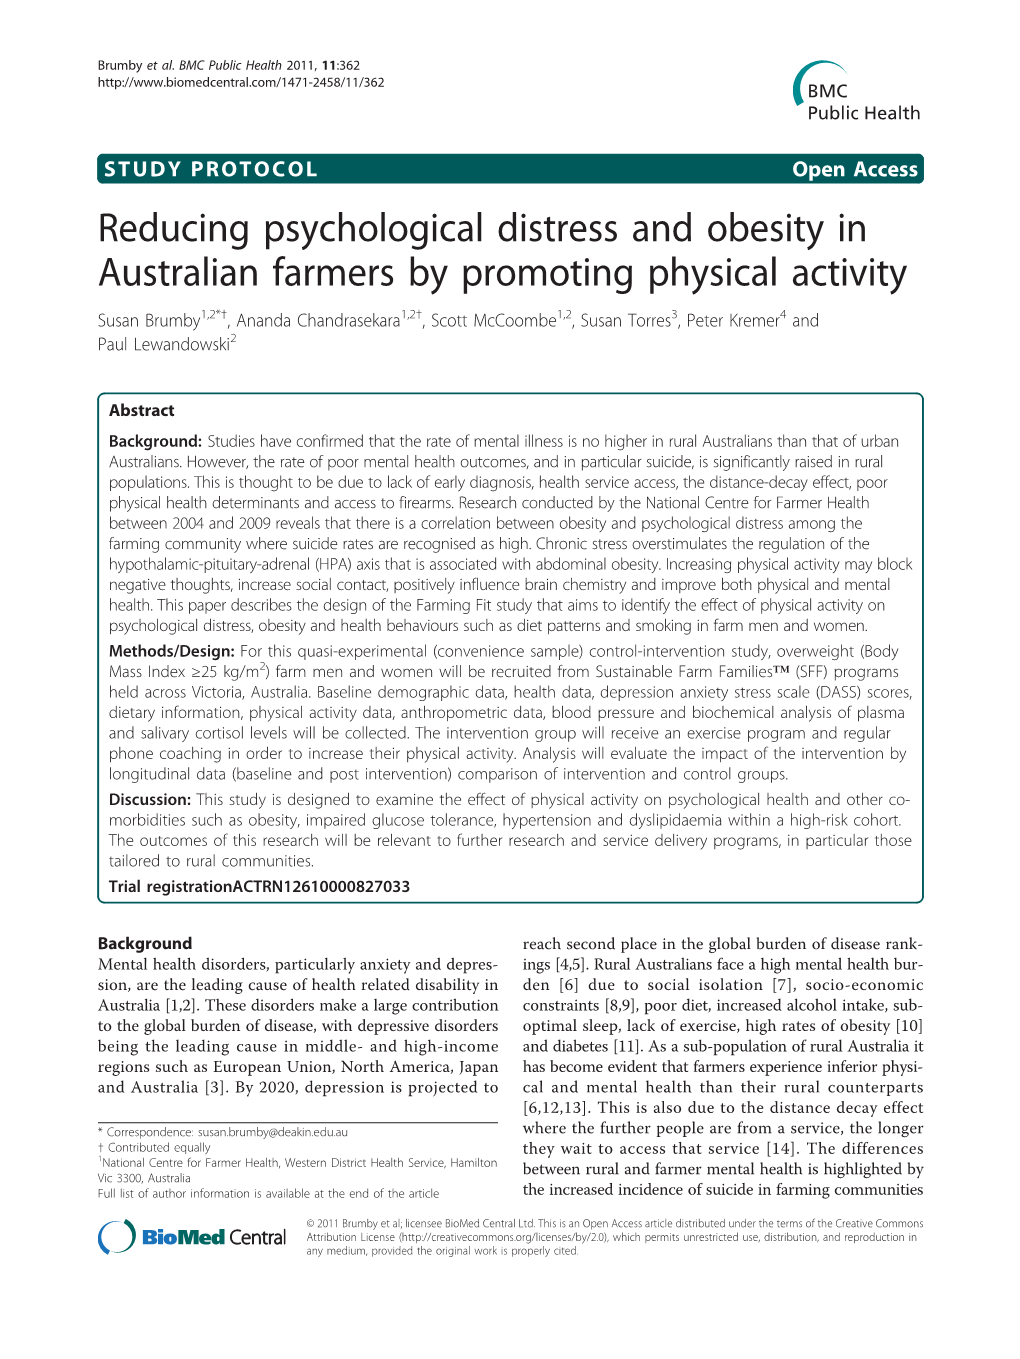 Reducing Psychological Distress and Obesity in Australian Farmers By